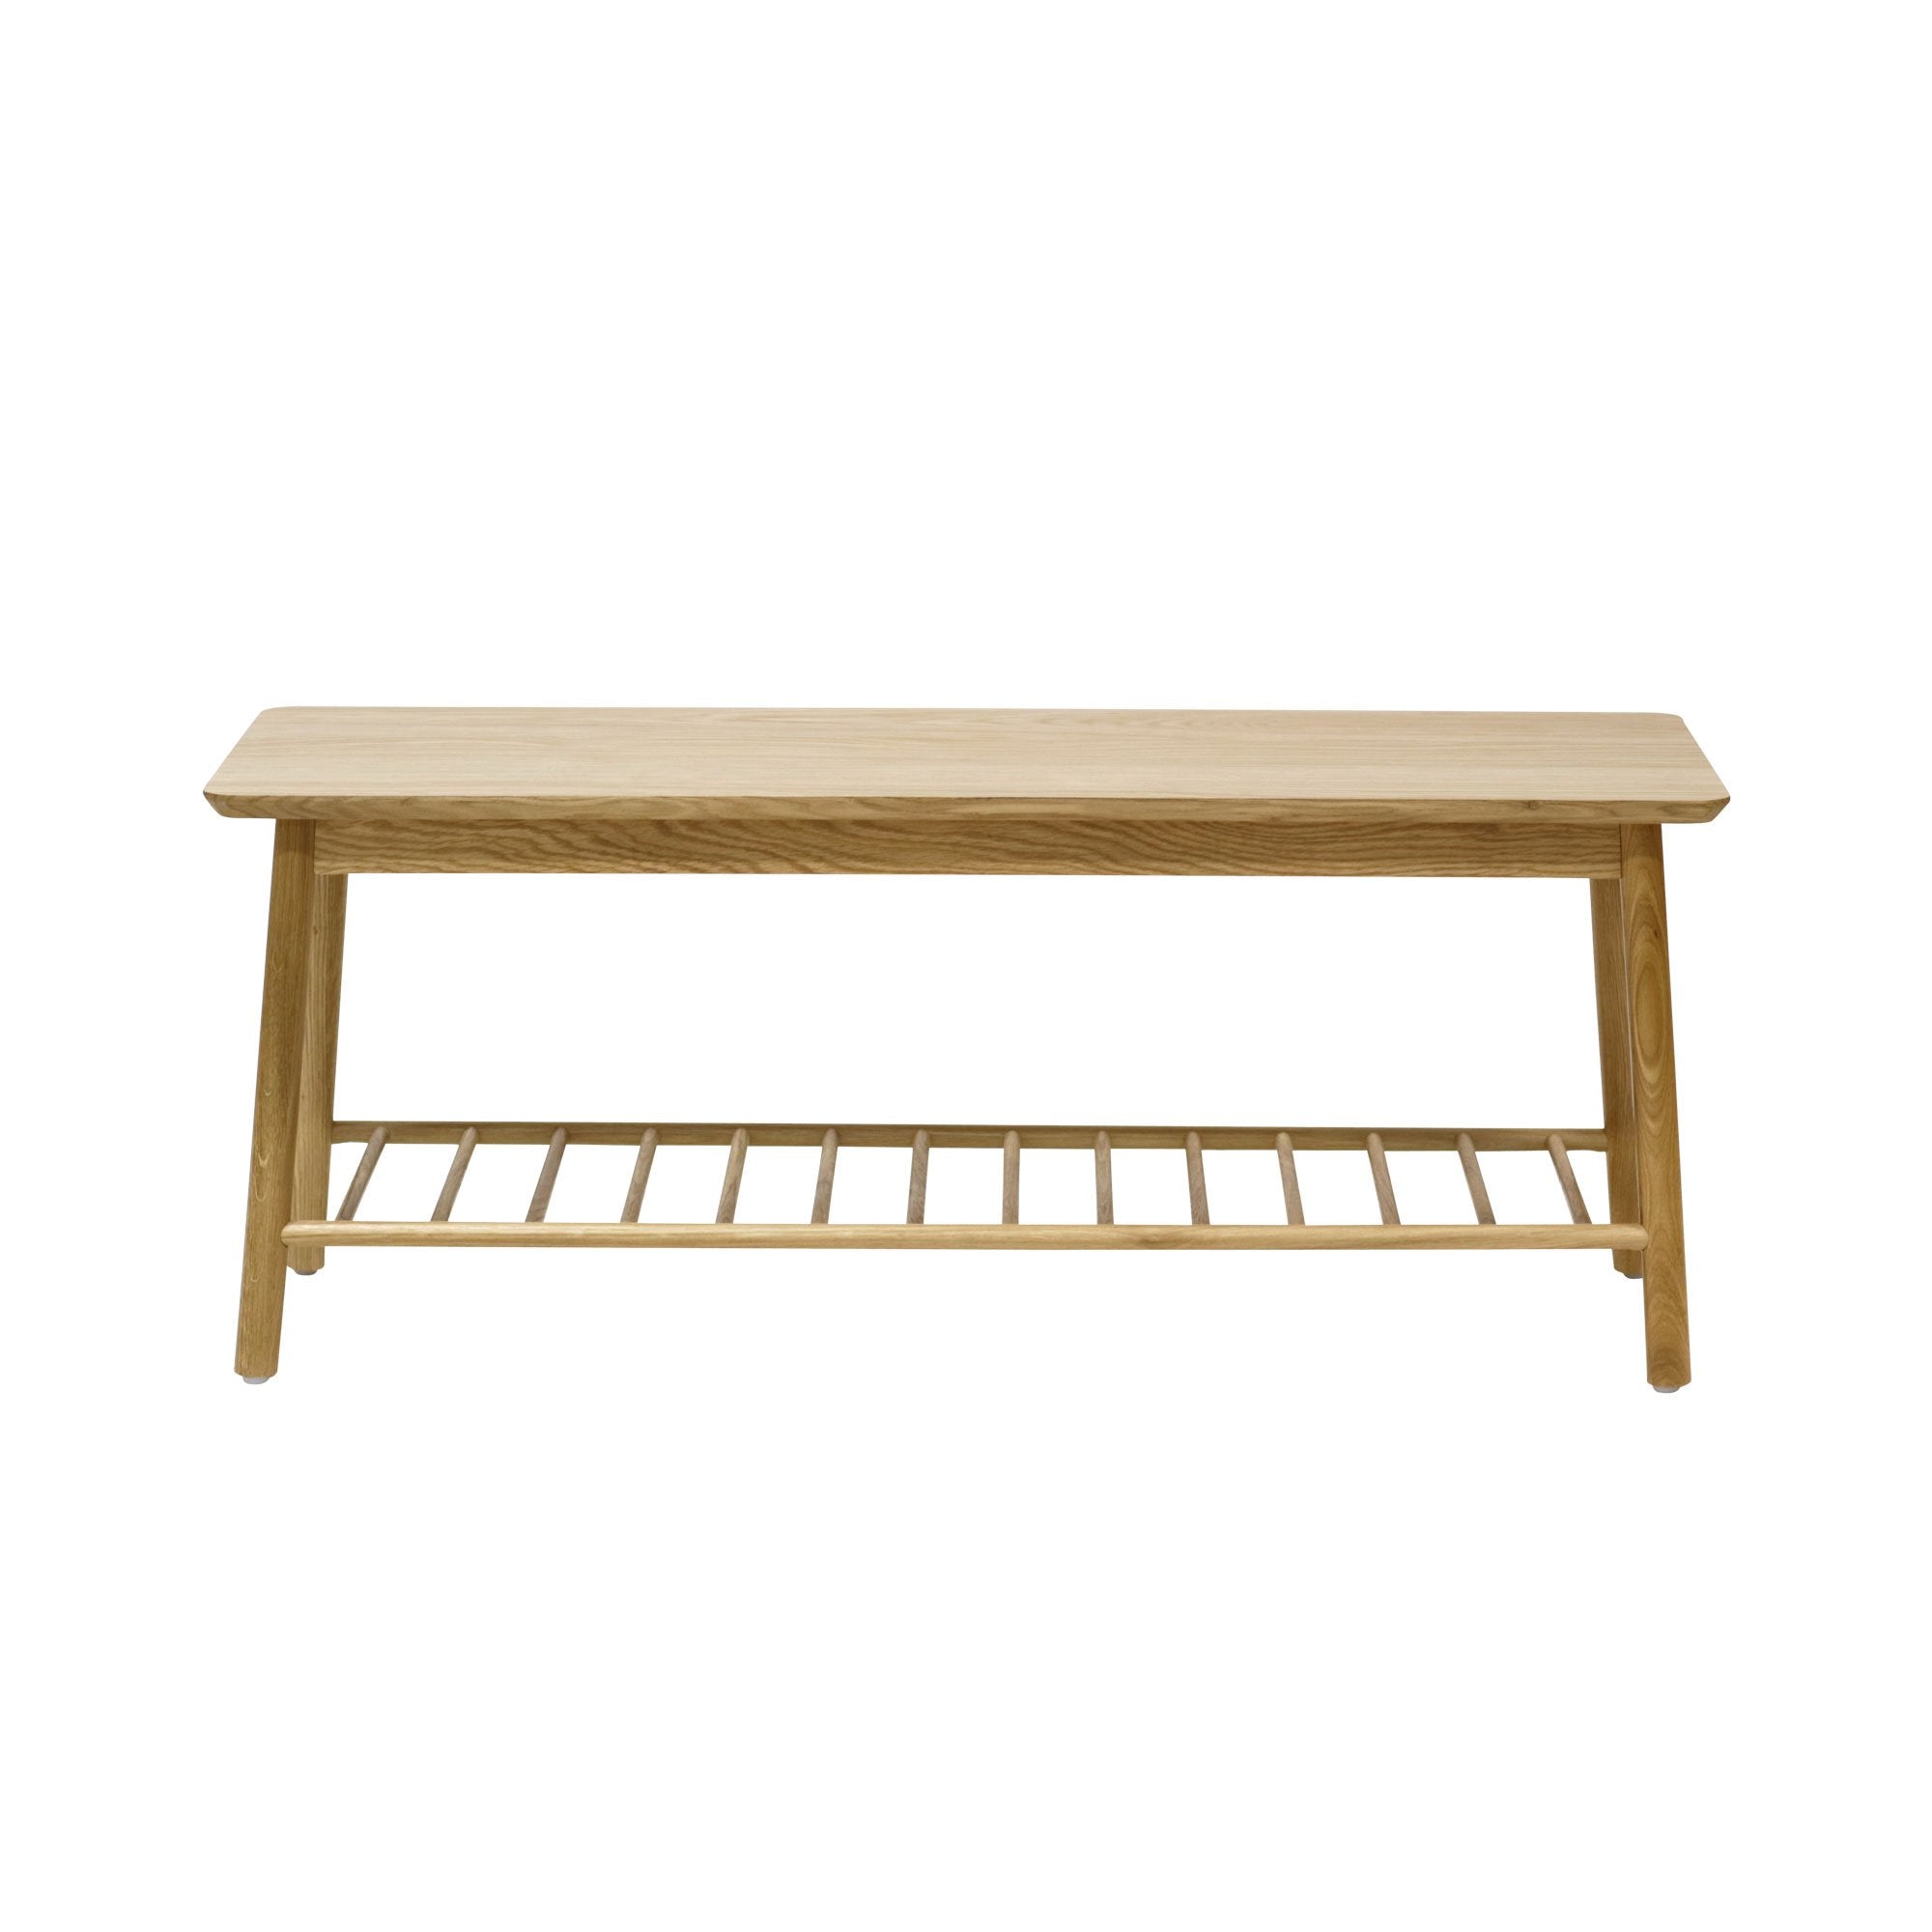 Japandi Rectangular Wooden Open Shelf Coffee Table - Natural Fast shipping On sale